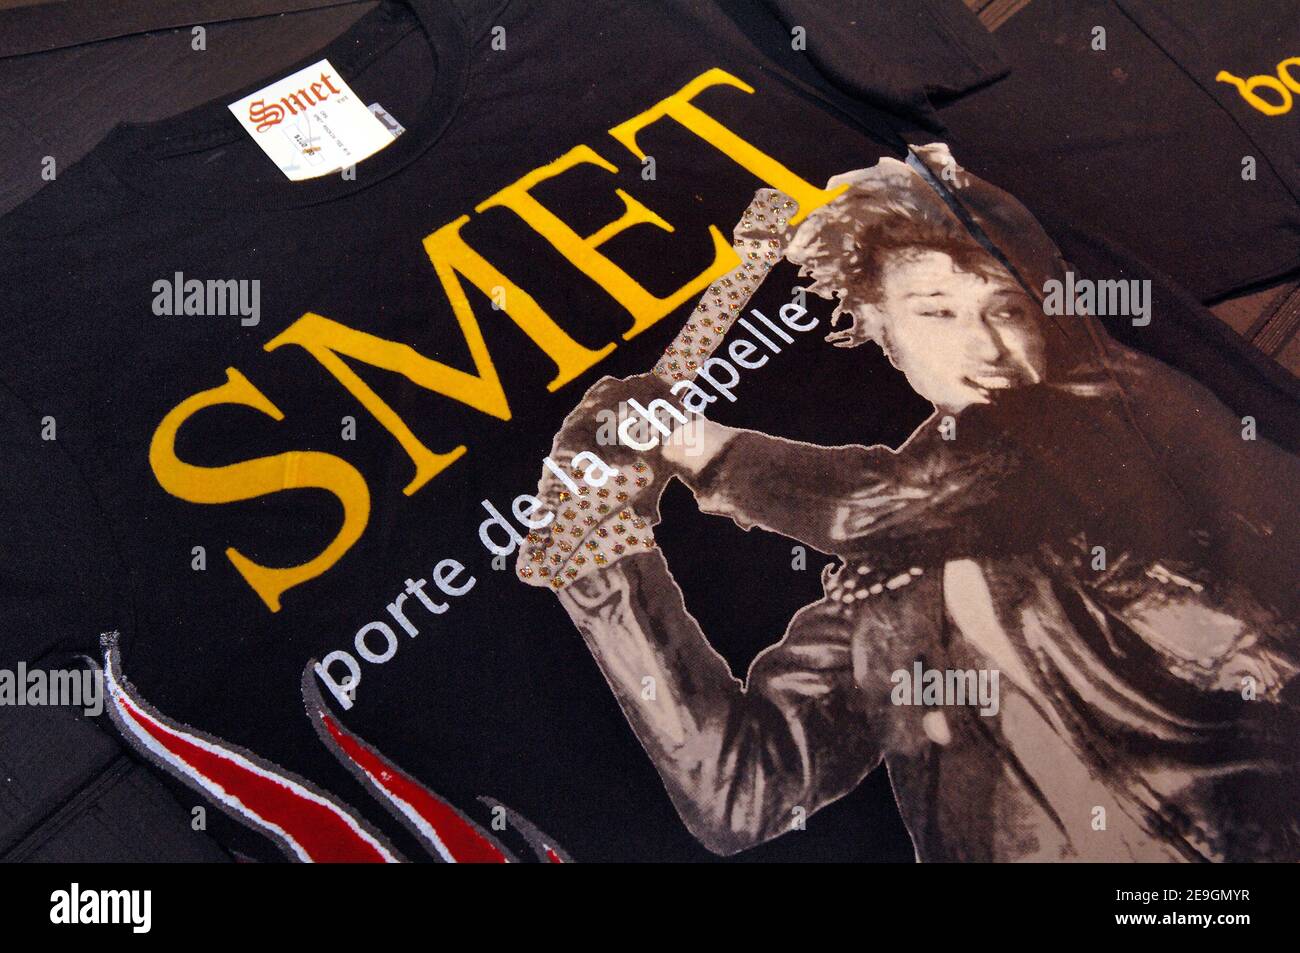 Christian Audigier presents 'Smet ', his latest fashion collection honoring  French rock legend Johnny Hallyday in his store of Melrose Avenue in Los  Angeles, CA, USA on July 29, 2006. Photo by